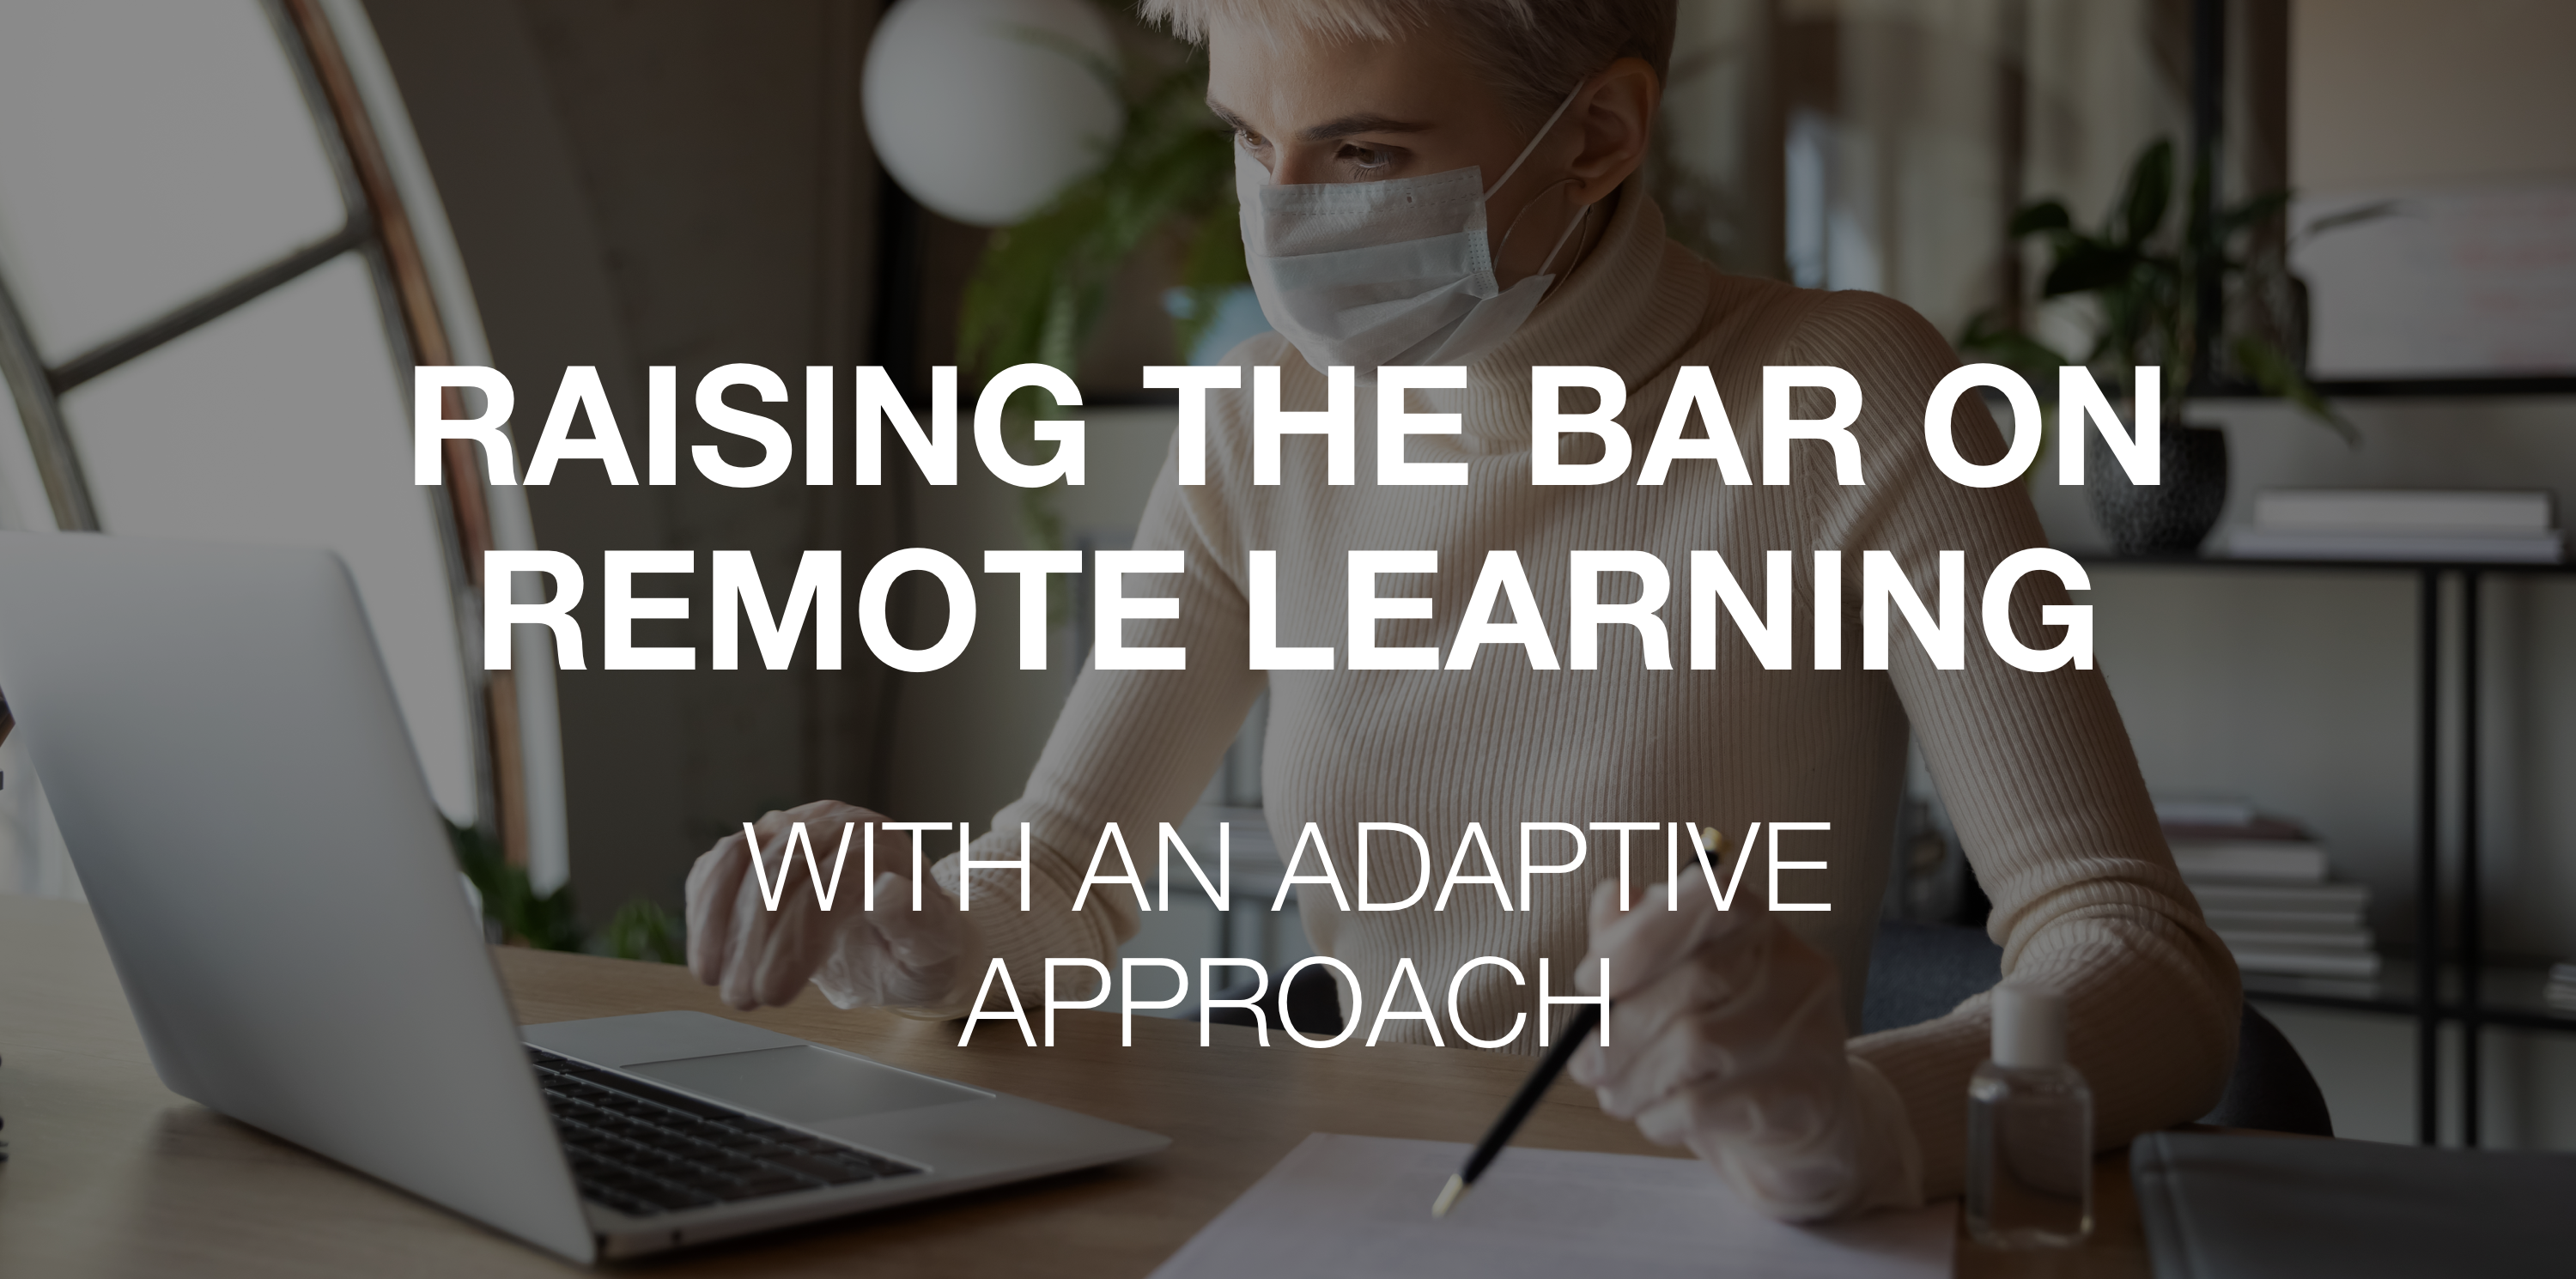 Raising the Bar on Remote Learning with an Adaptive Approach